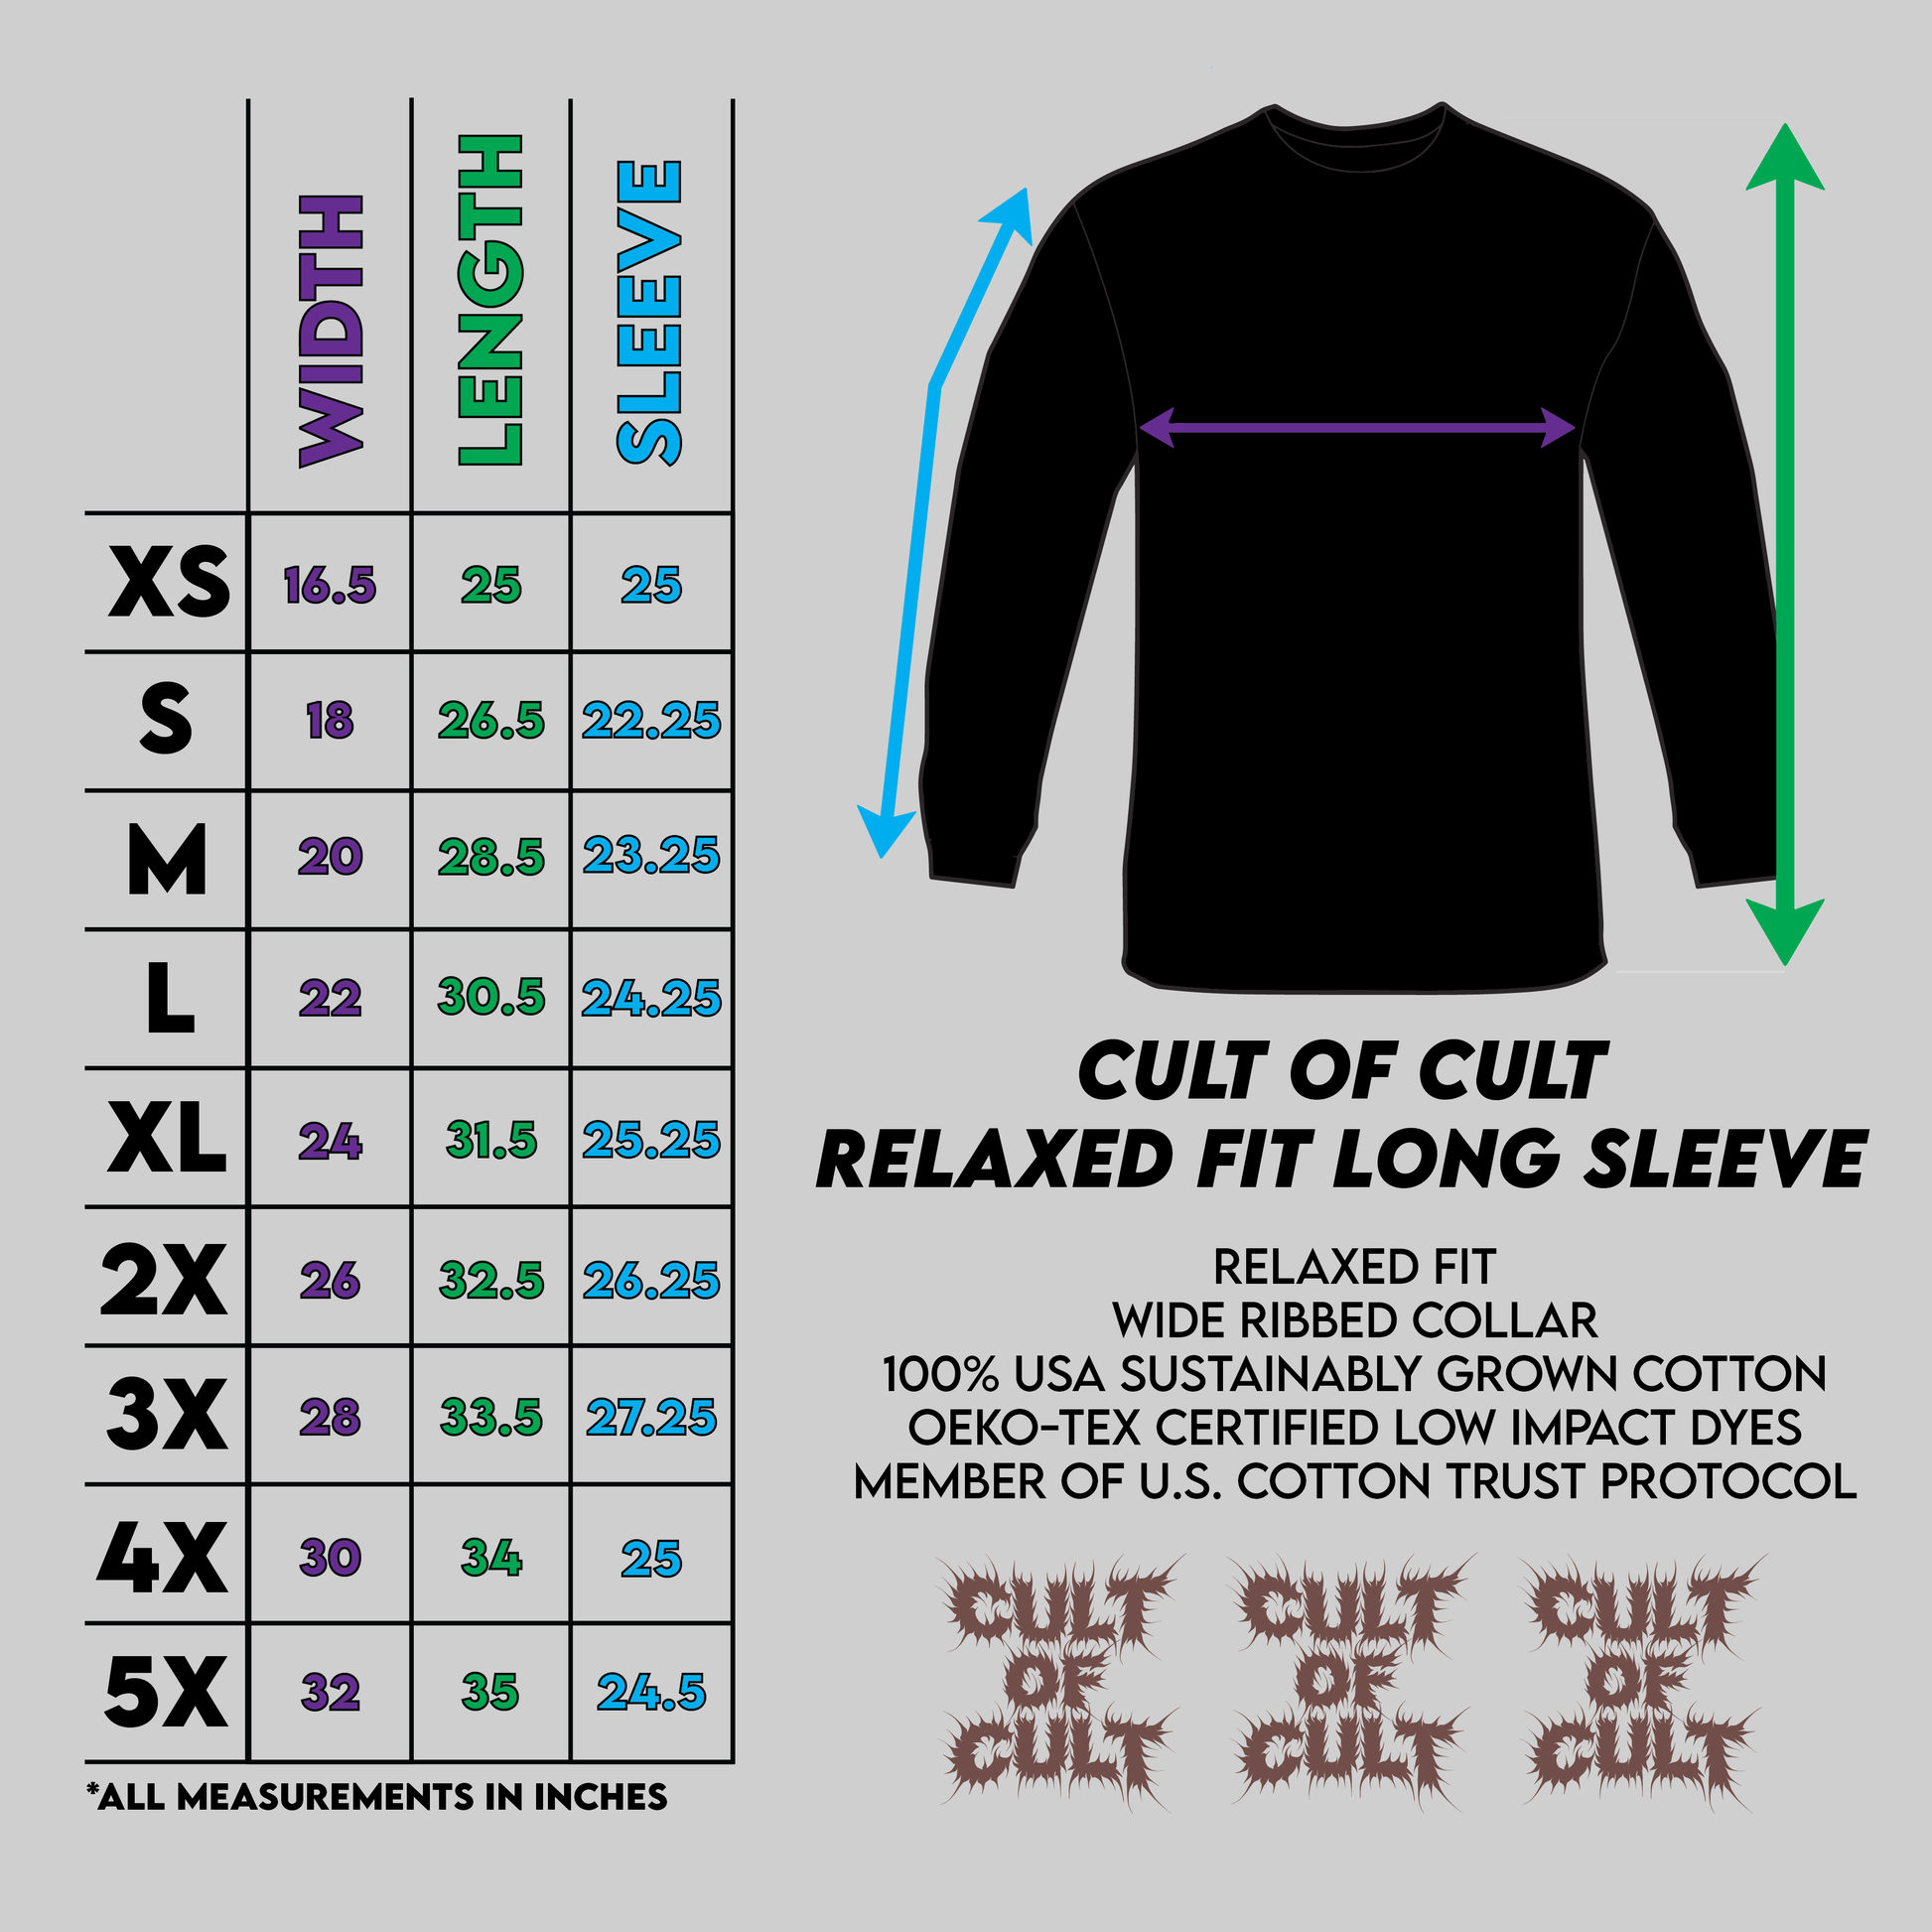 cult of cult sizing chart for long sleeve shirts